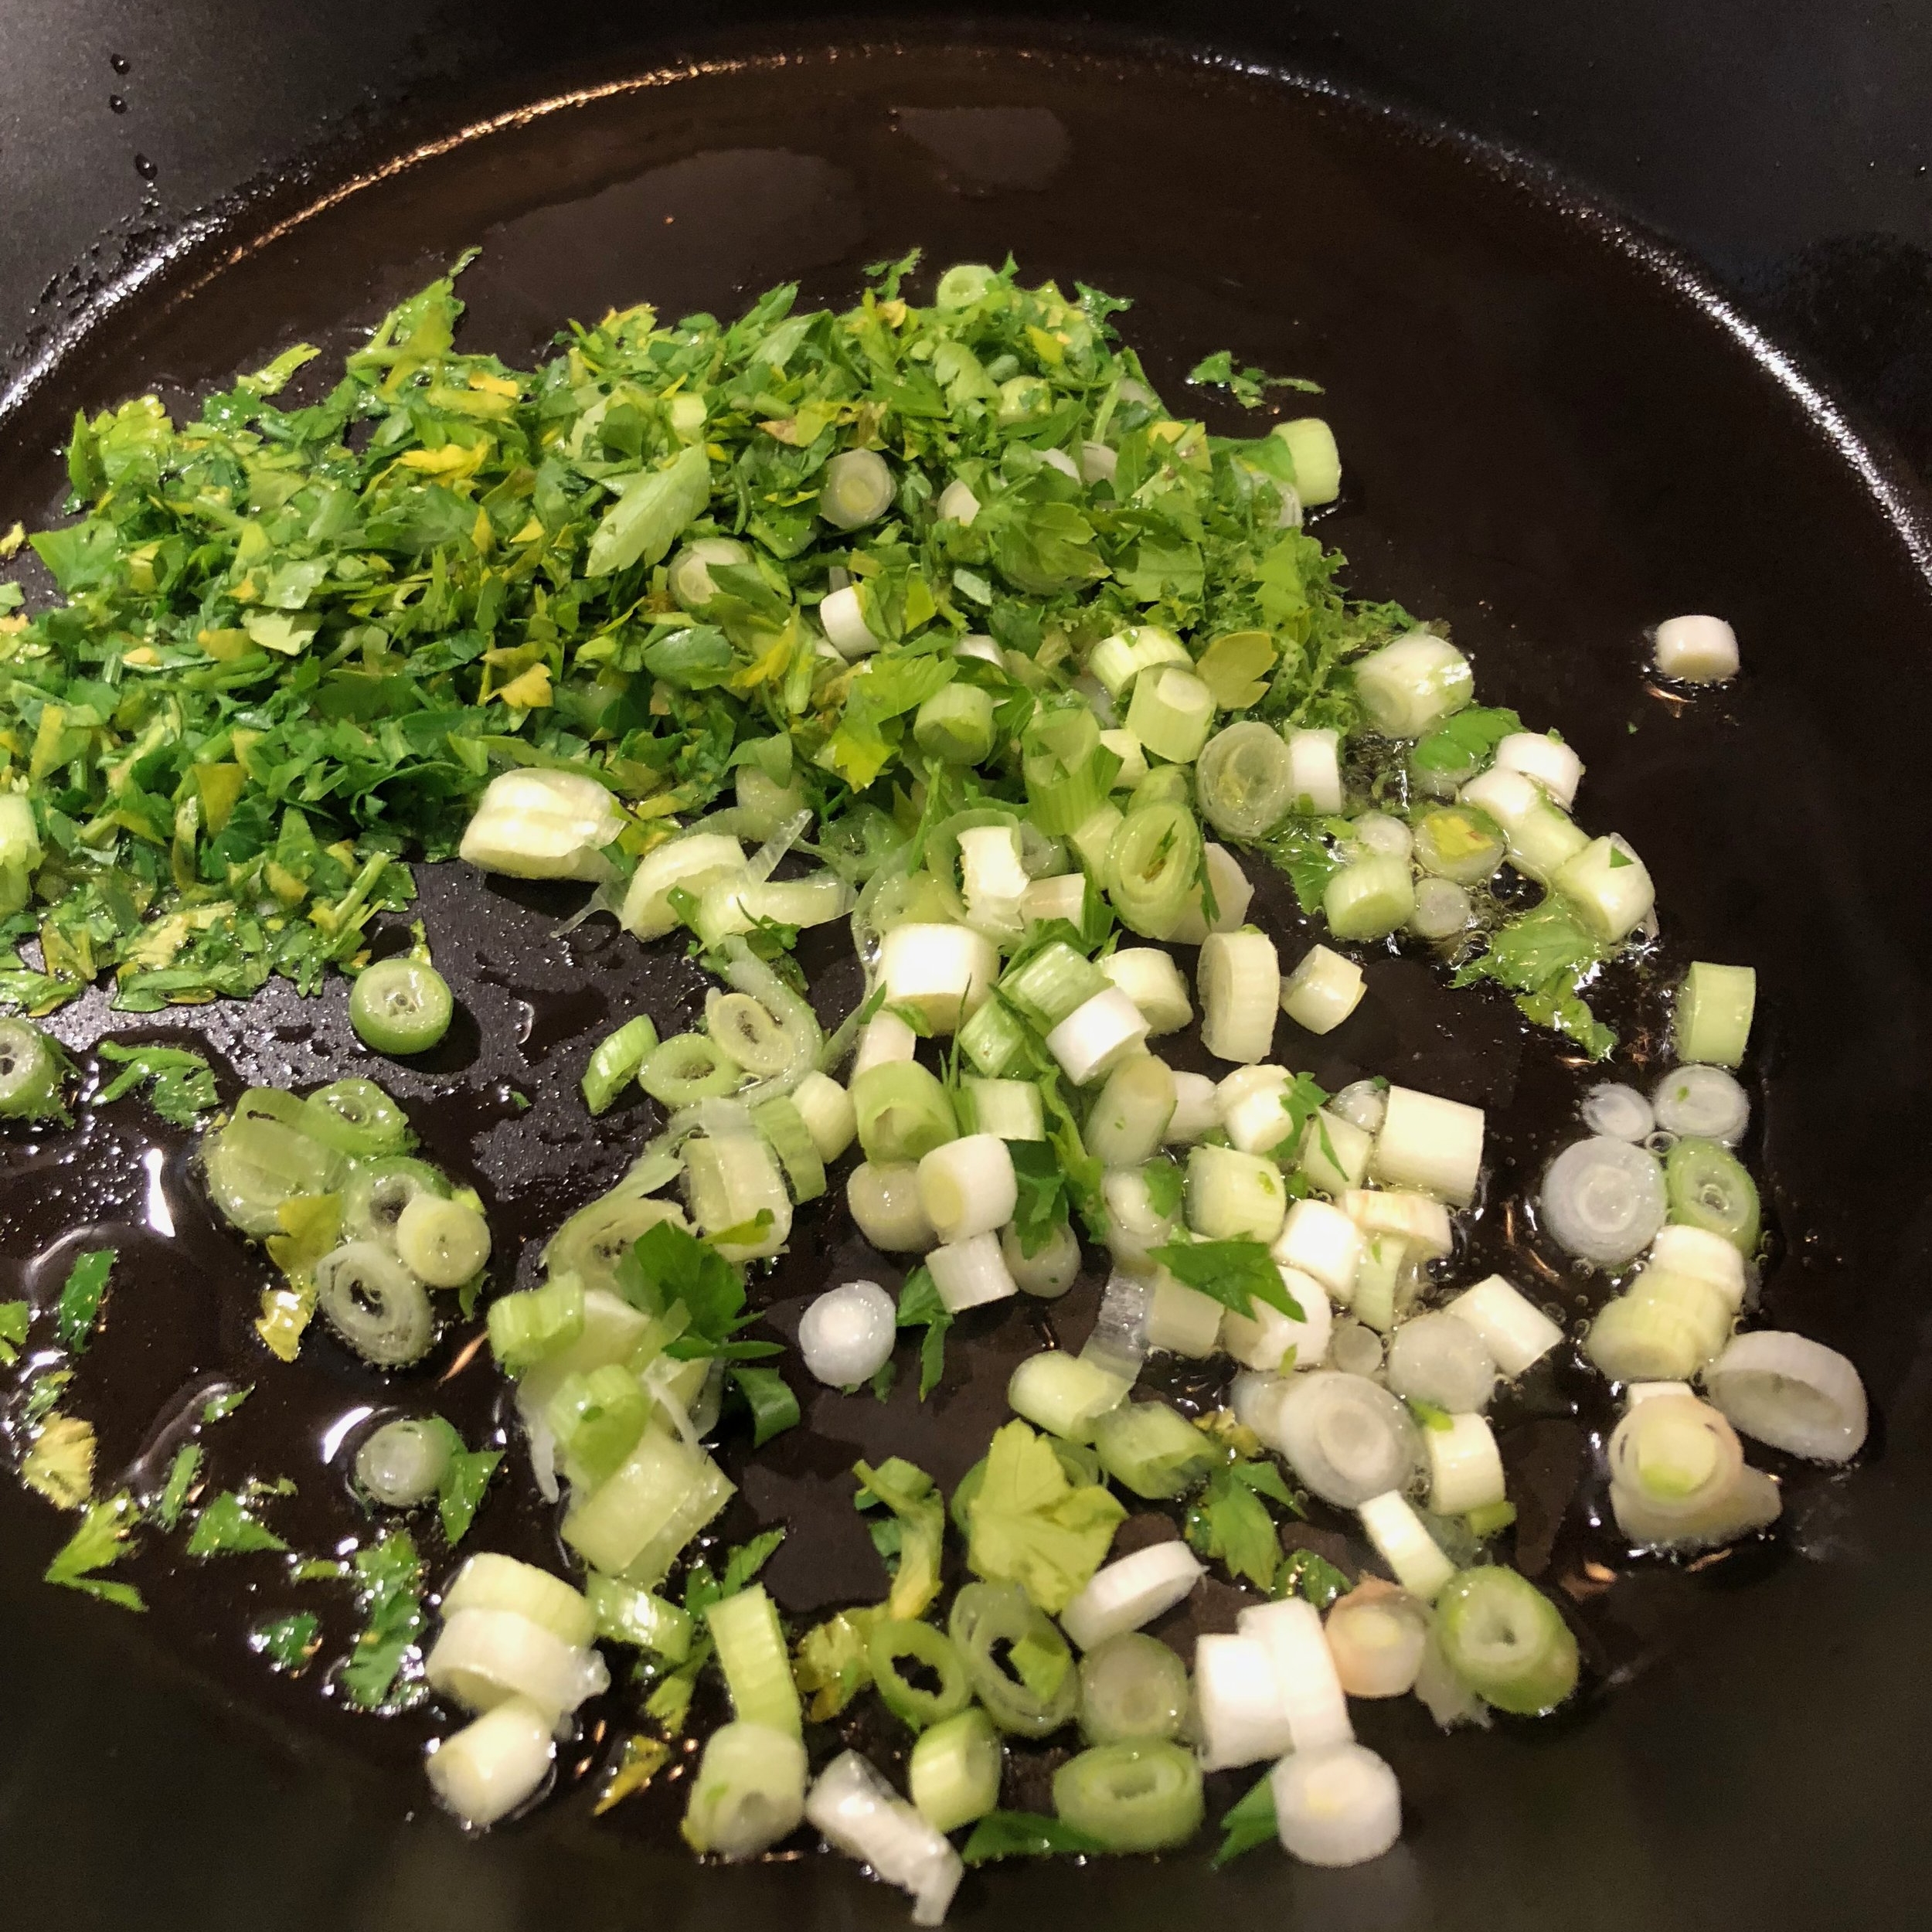 Spring onions, parsley and lemon